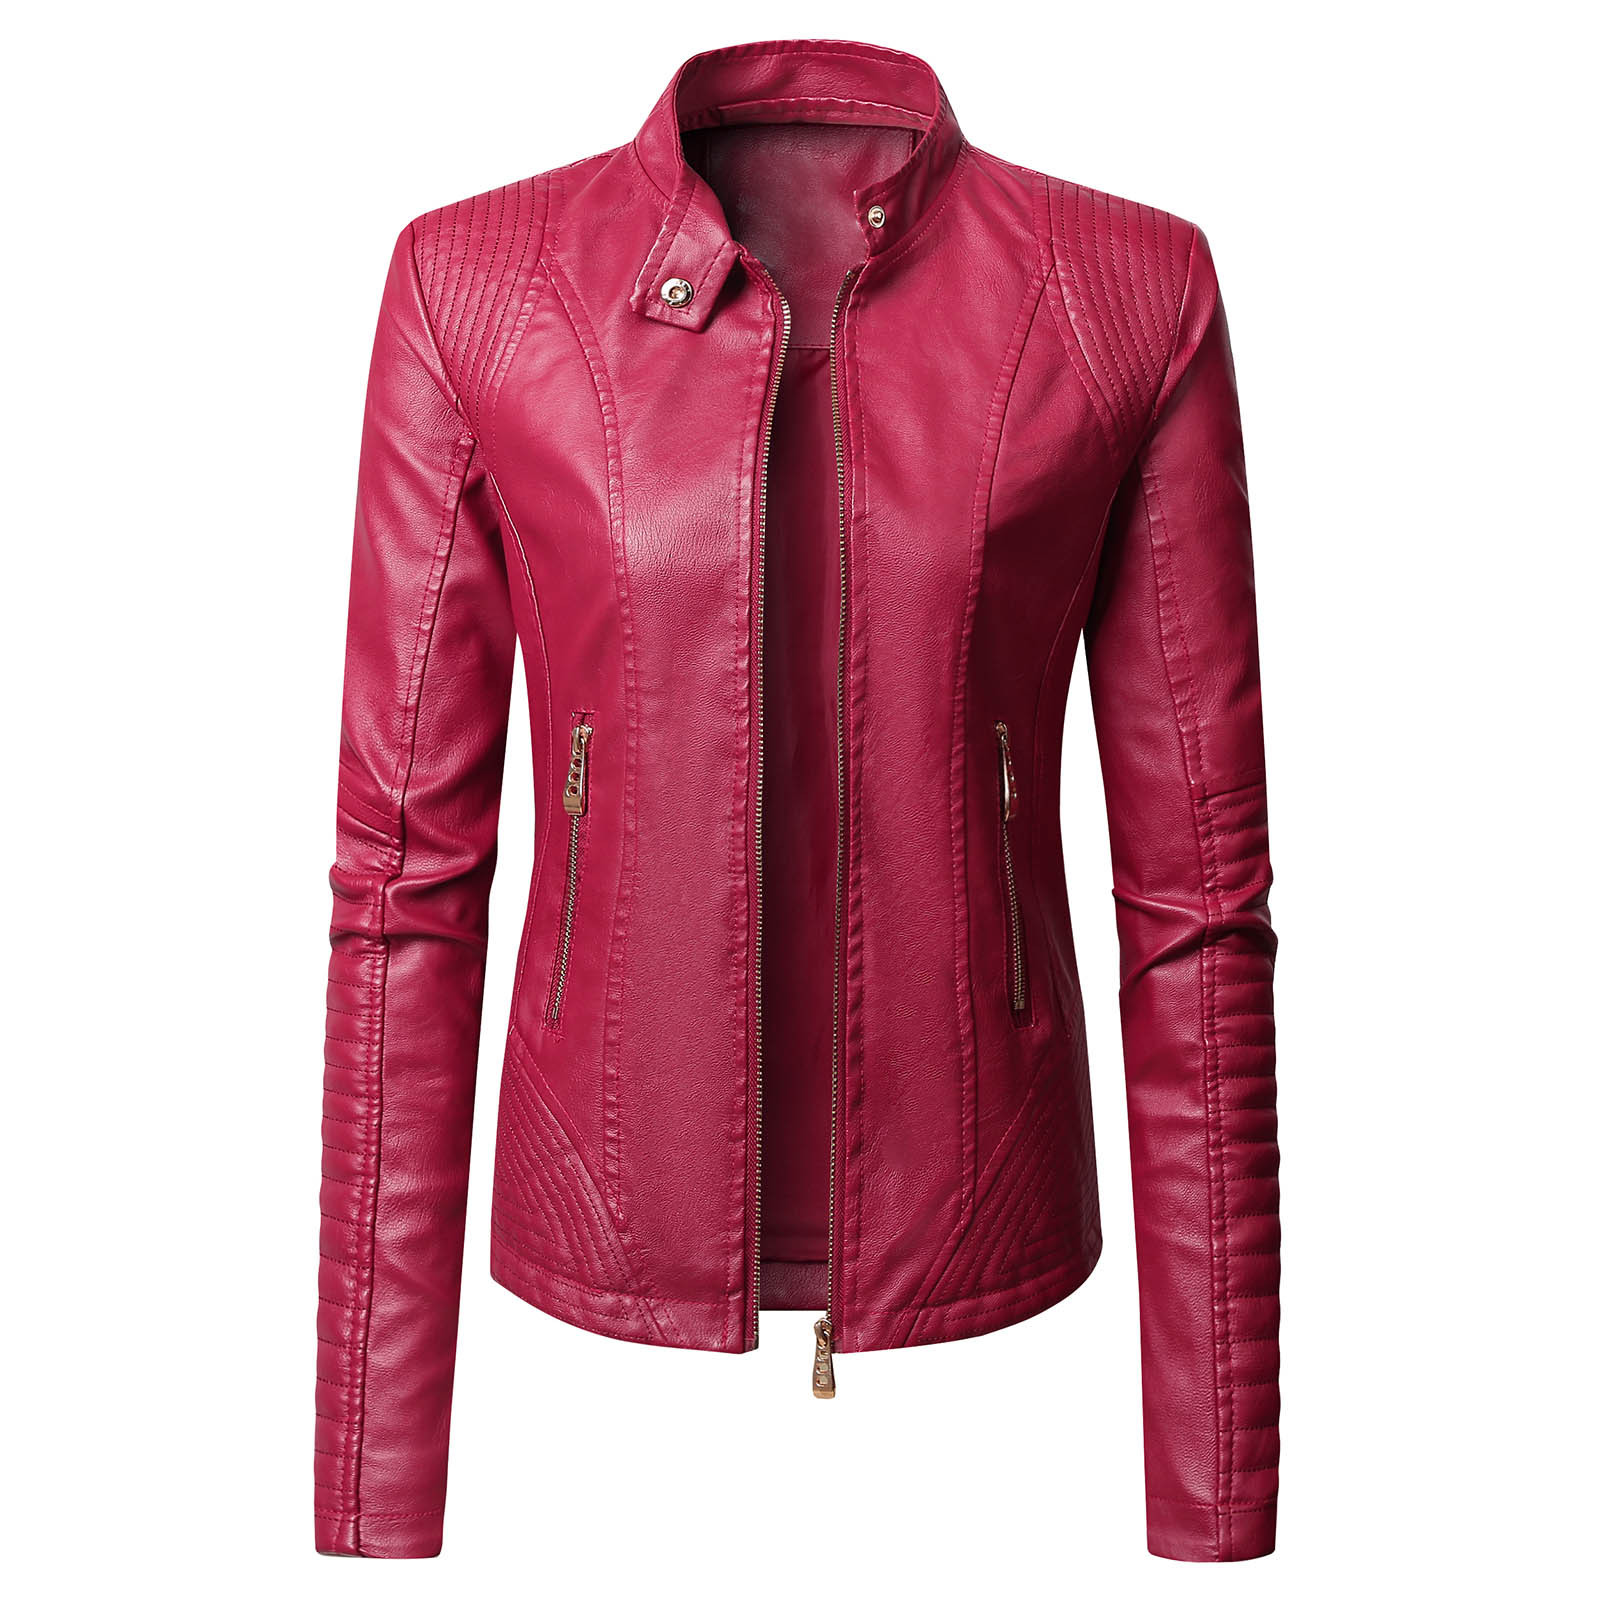 Fanxing Clearance Deals Bomber Leather Jacket Women Fitted Fashion Winter Coats Long Sleeve Full Zip Outwear Stand Collar Motorcycle Jackets - image 1 of 6